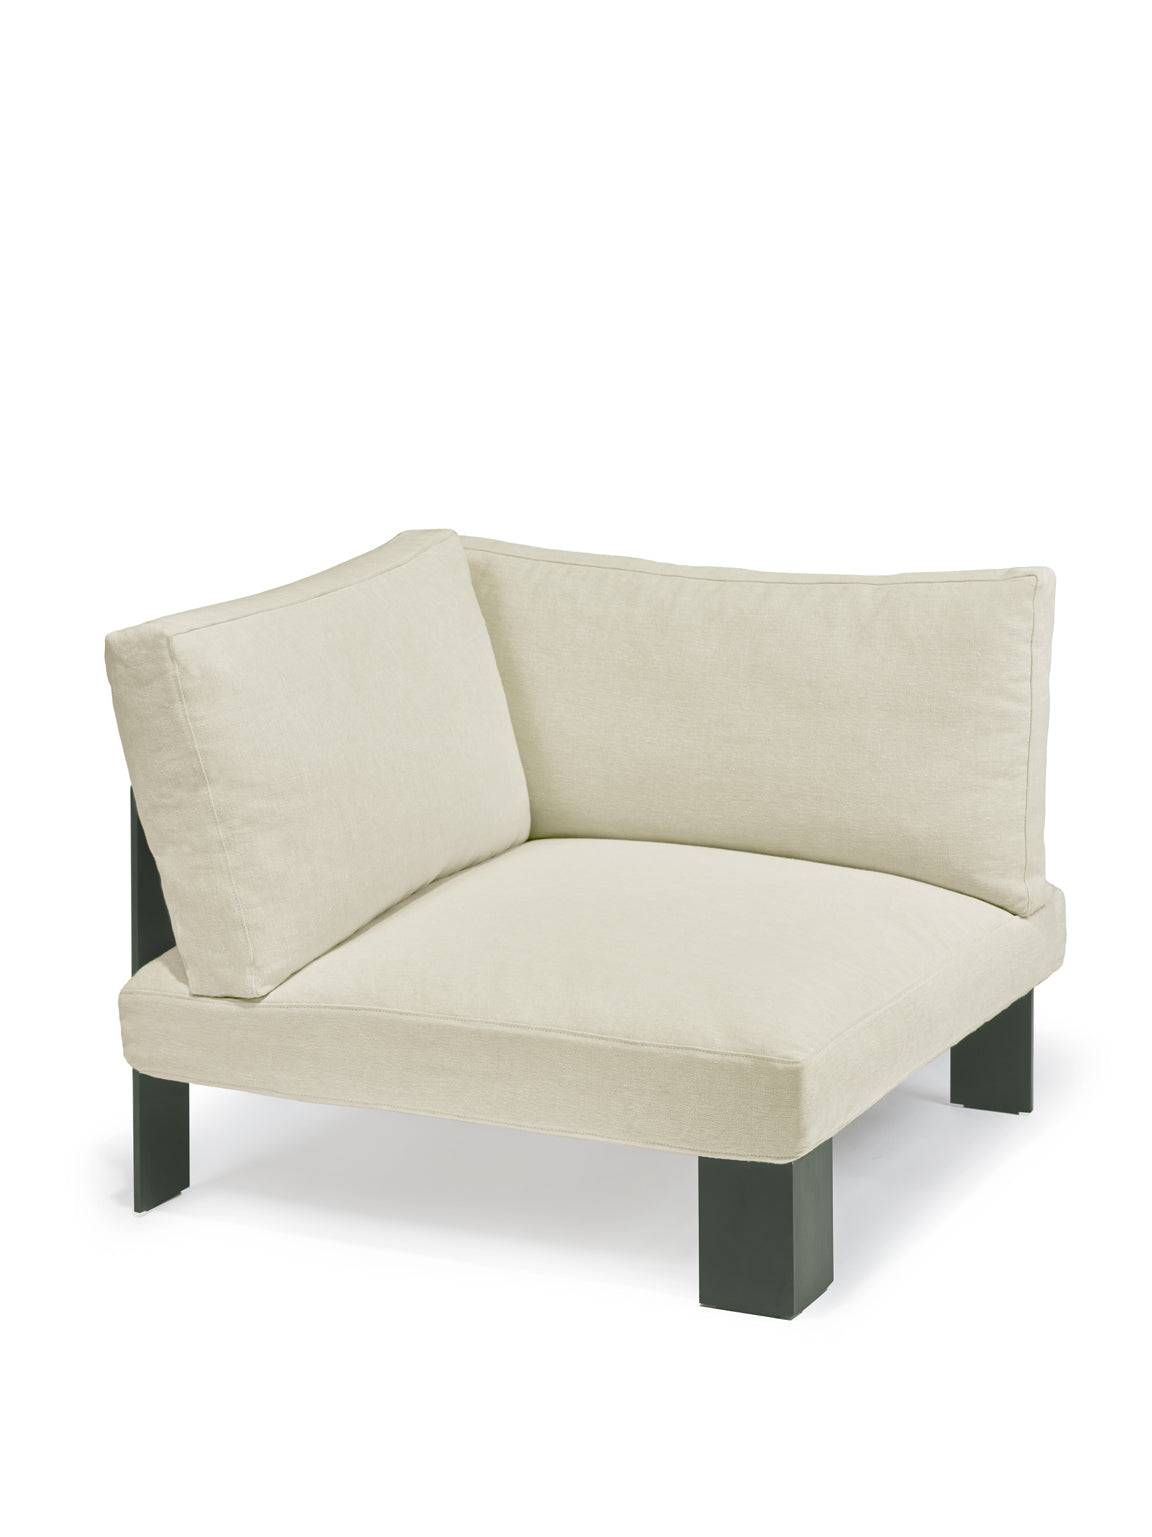 Mombaers Outdoor Sofa - Chalk - THAT COOL LIVING